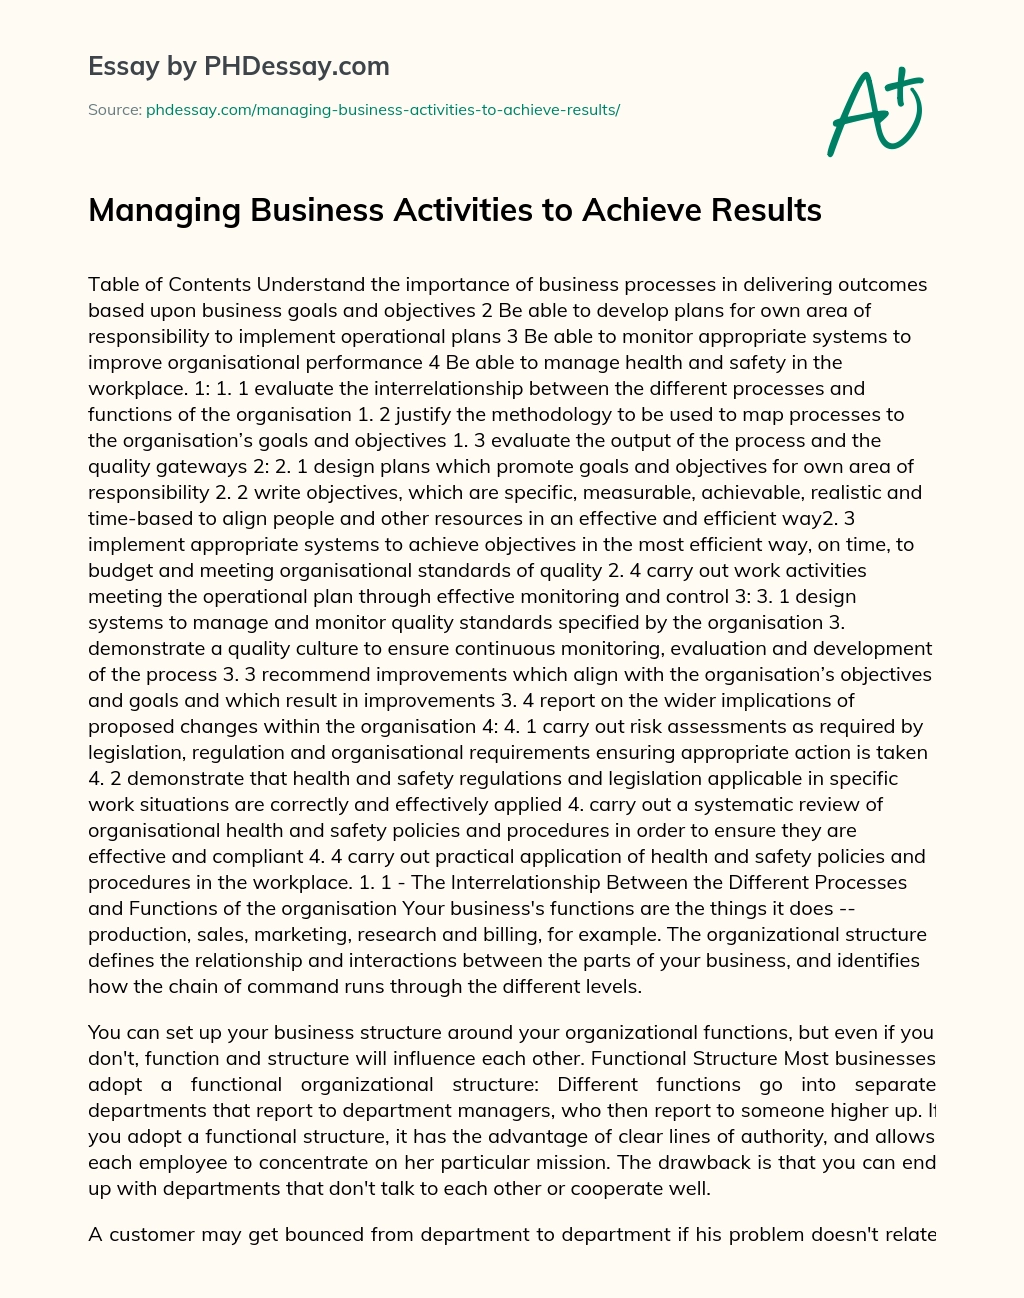 Managing Business Activities to Achieve Results essay